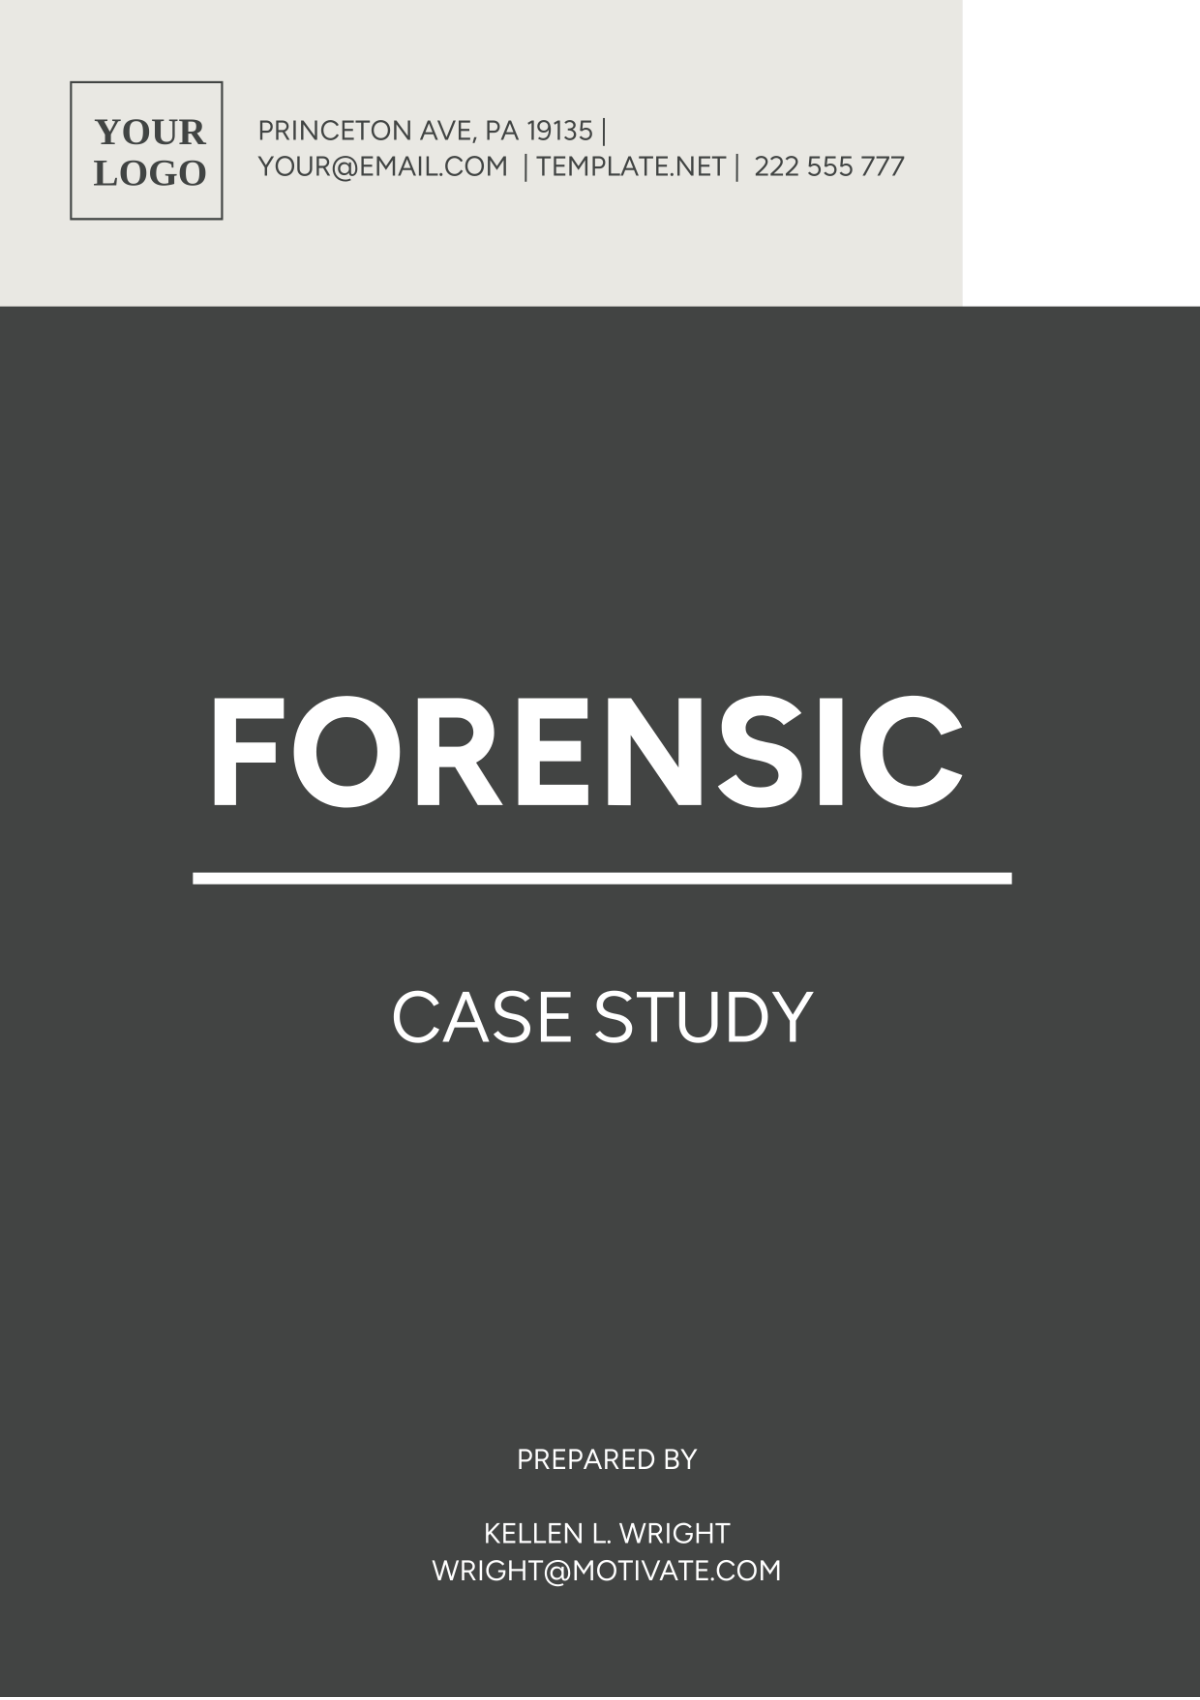 Forensic Case Study Template